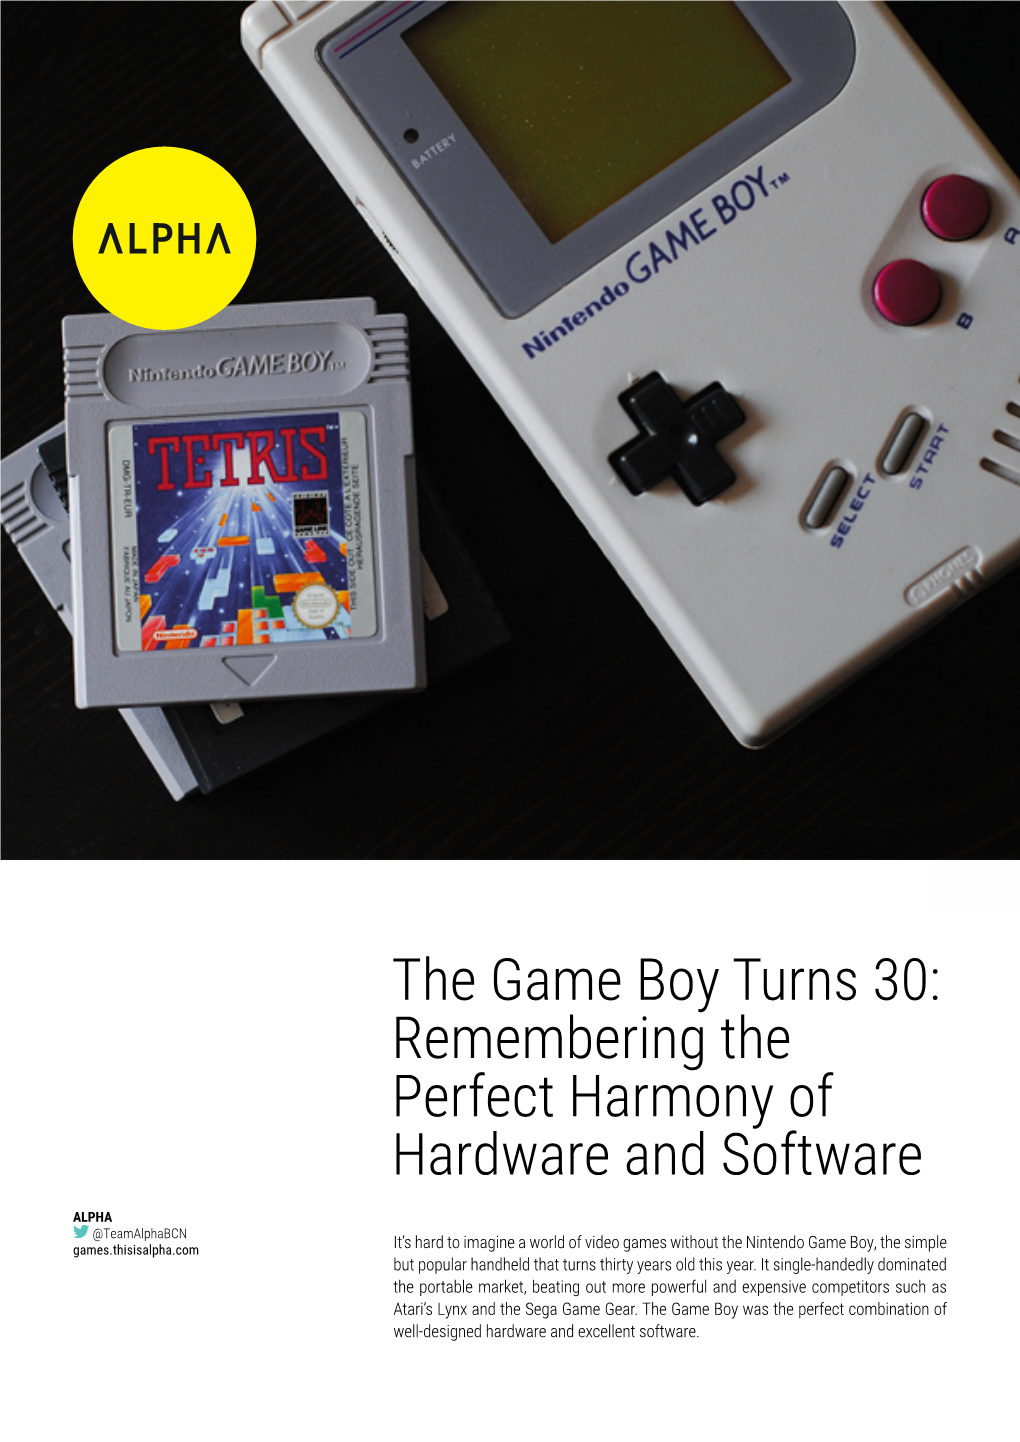 The Game Boy Turns 30: Remembering the Perfect Harmony of Hardware and Software